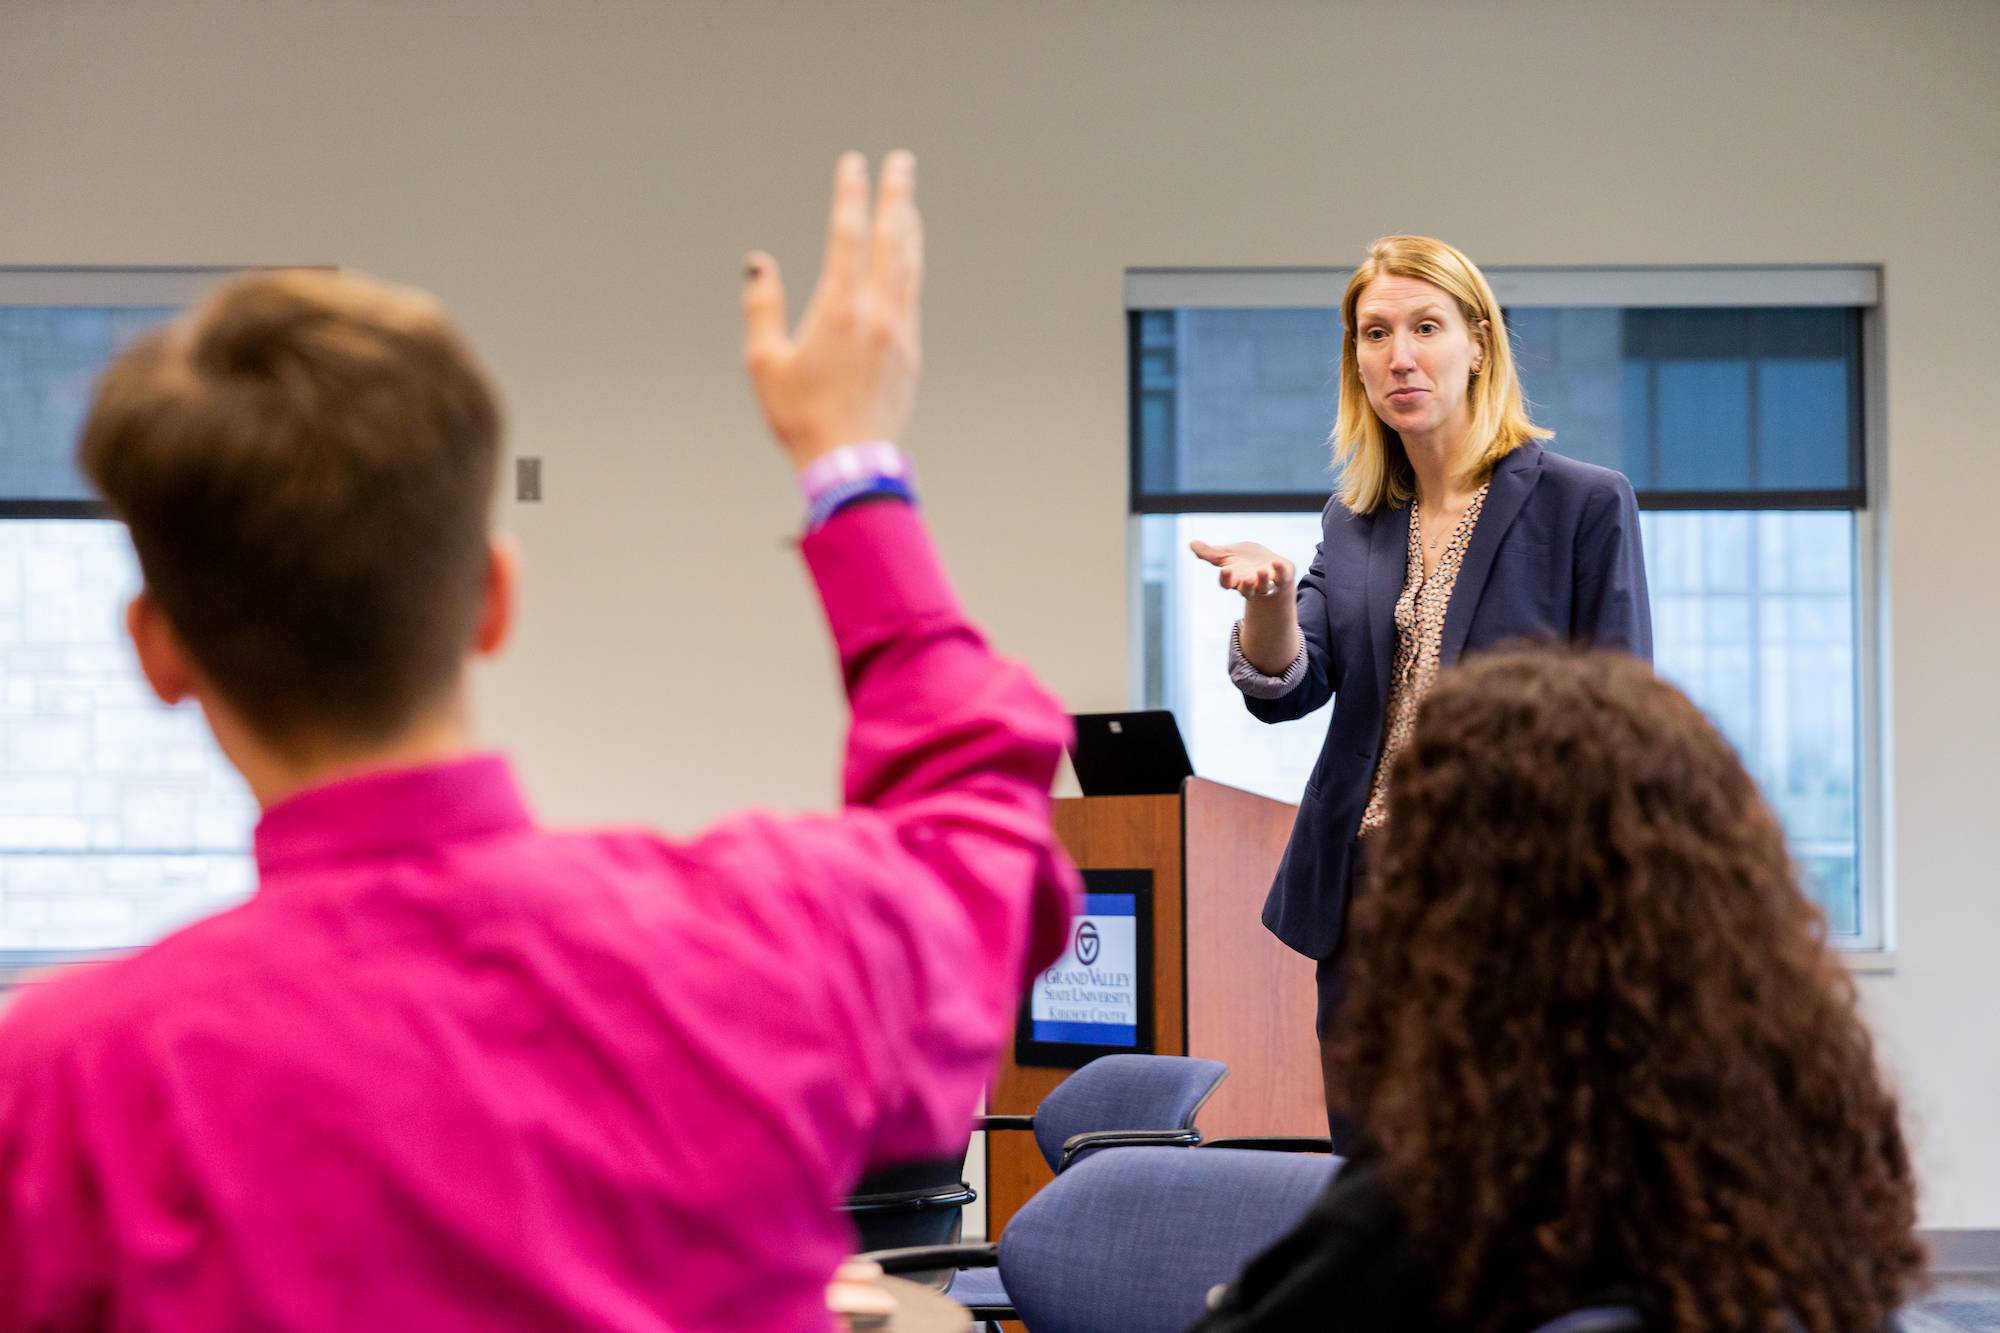 A speaker choosing a student who has their hand up